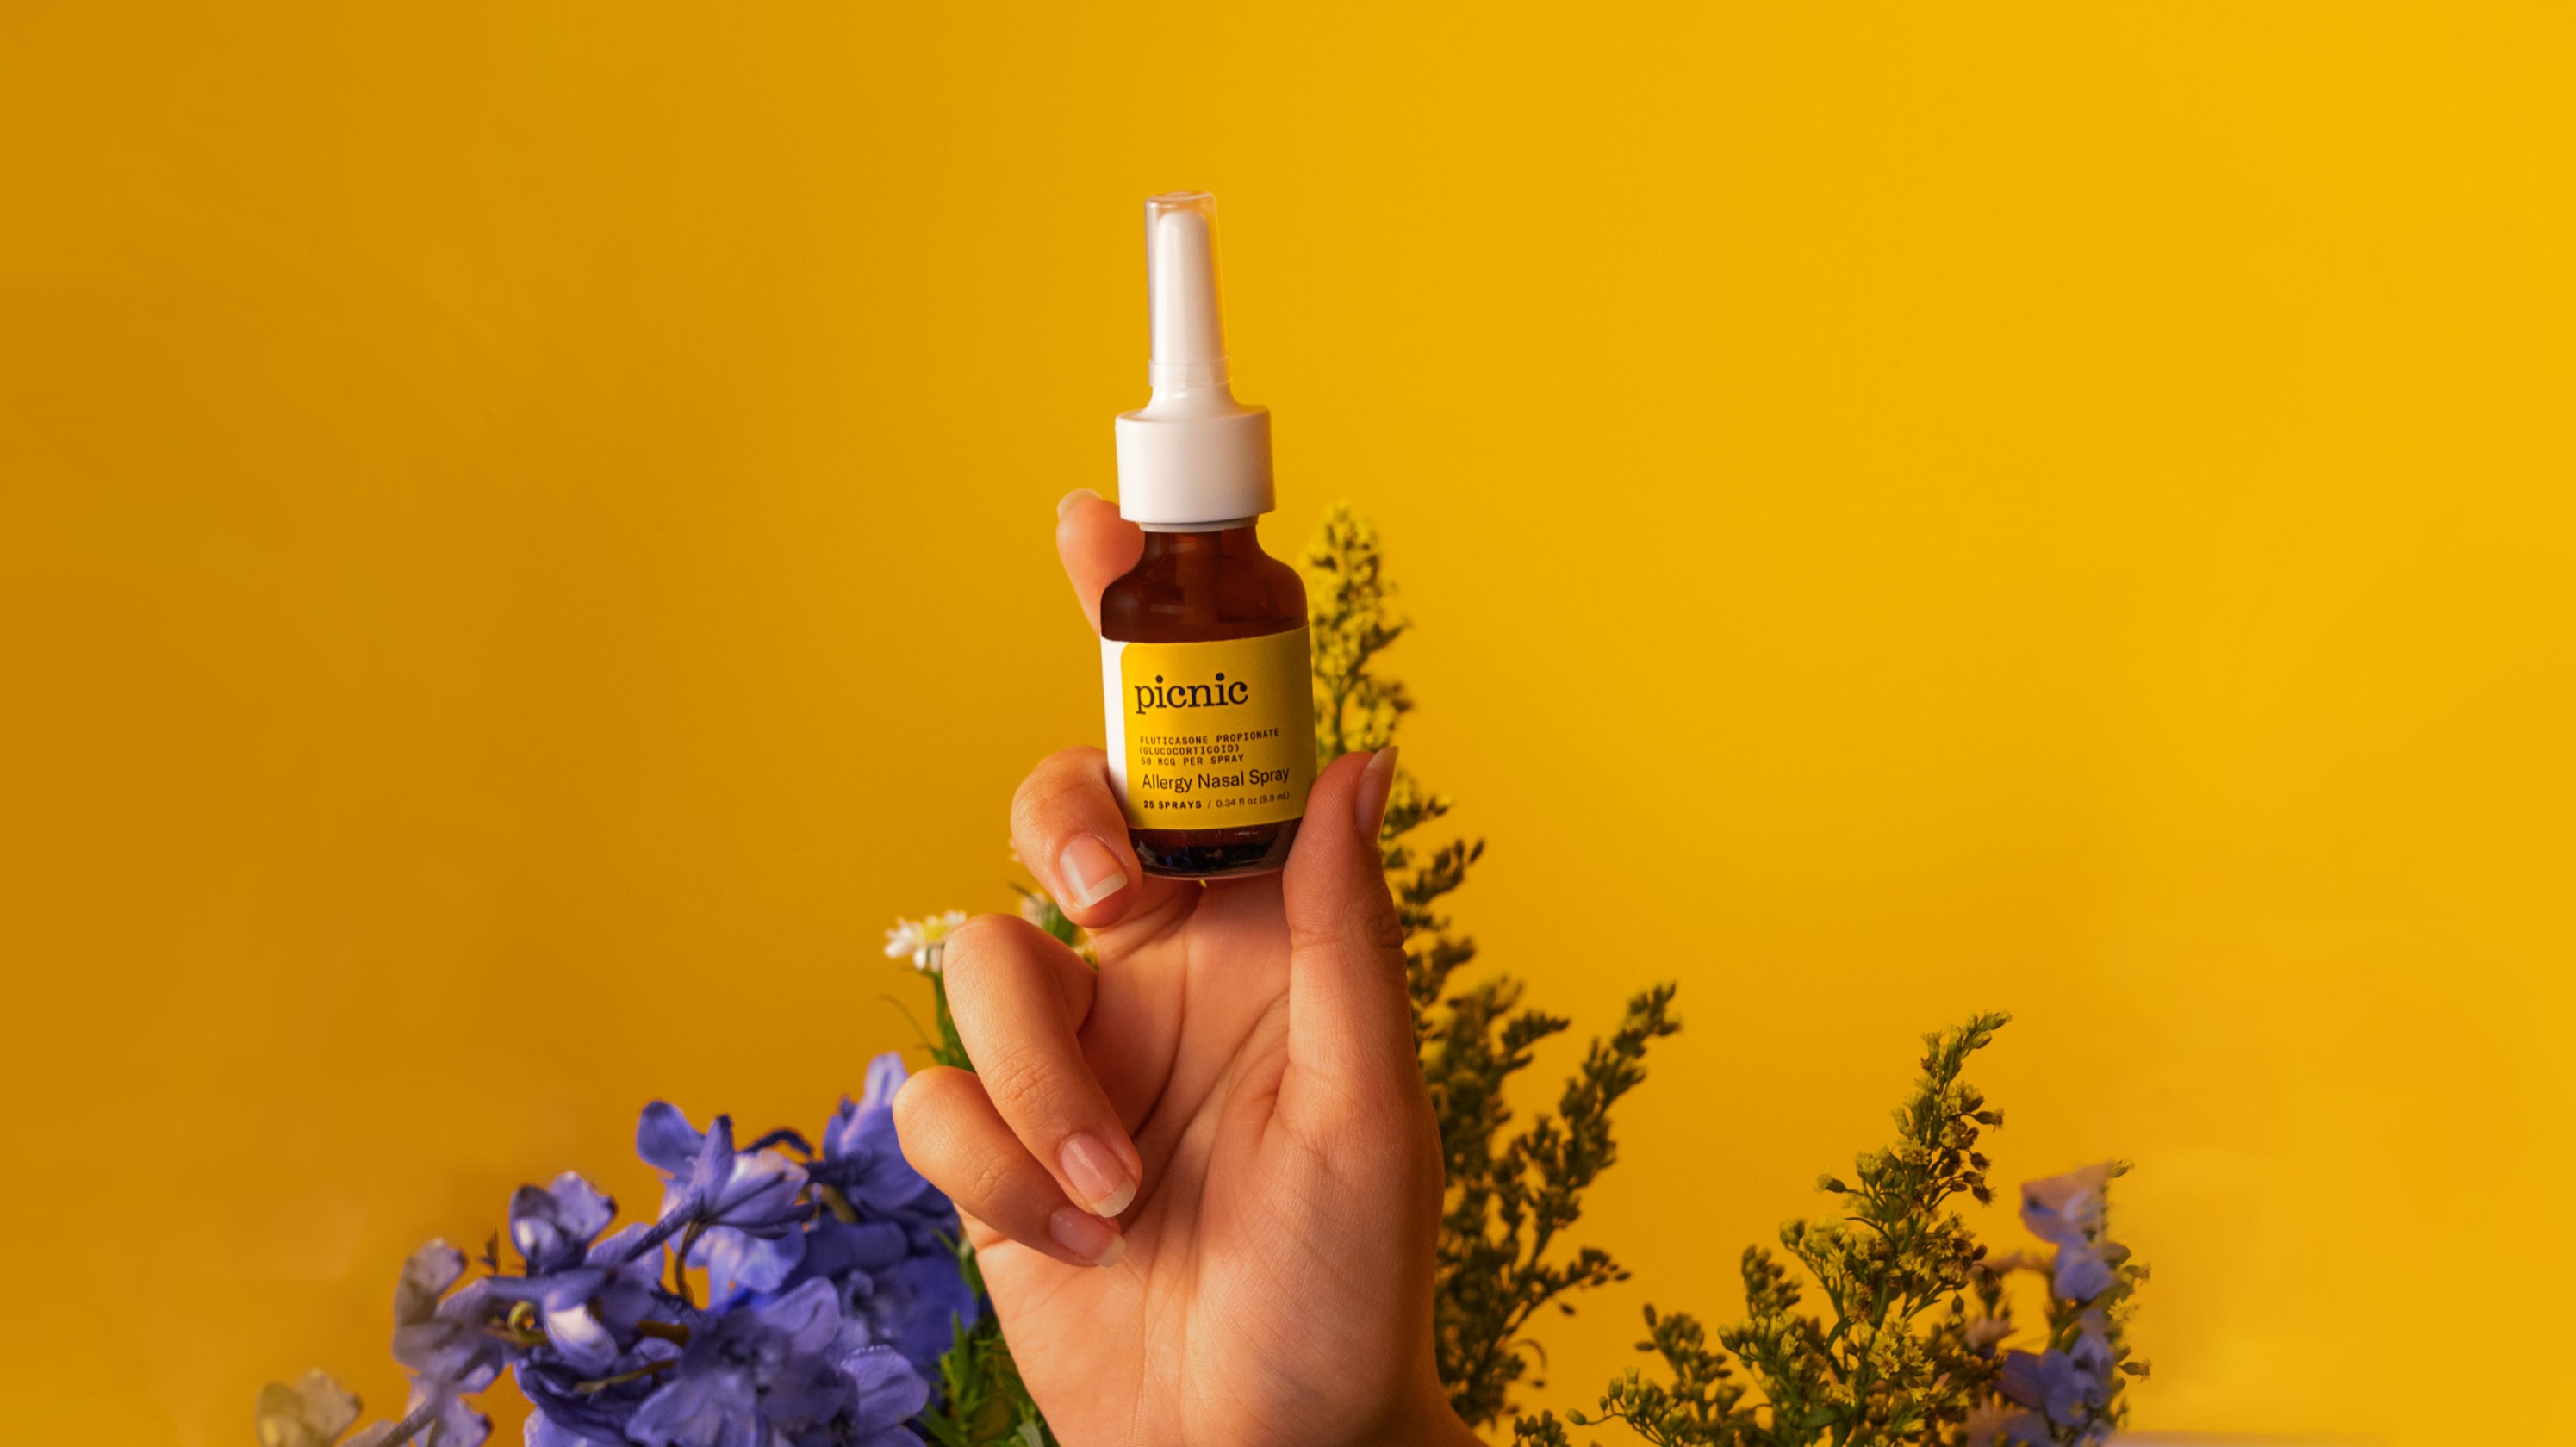 A person's hand holding up Picnic's nasal spray in front of flowers.